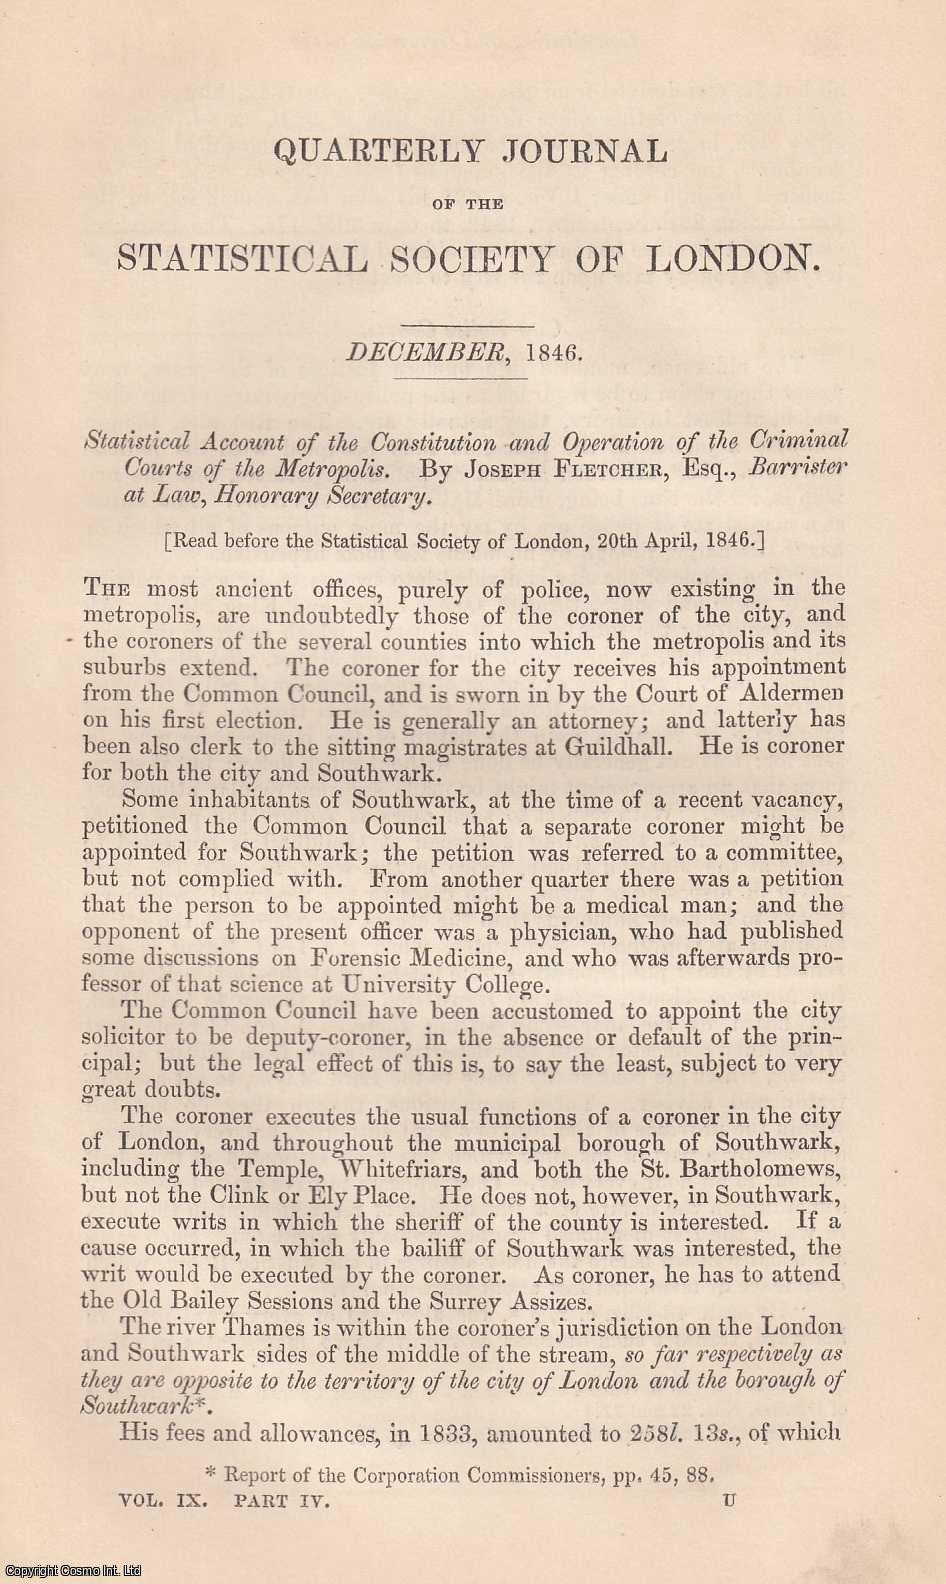 Joseph Fletcher, Esq - Constitution and Operation of the Criminal Courts of Metropolis. Statistical Account. A rare original article from the Journal of the Royal Statistical Society of London, 1846.